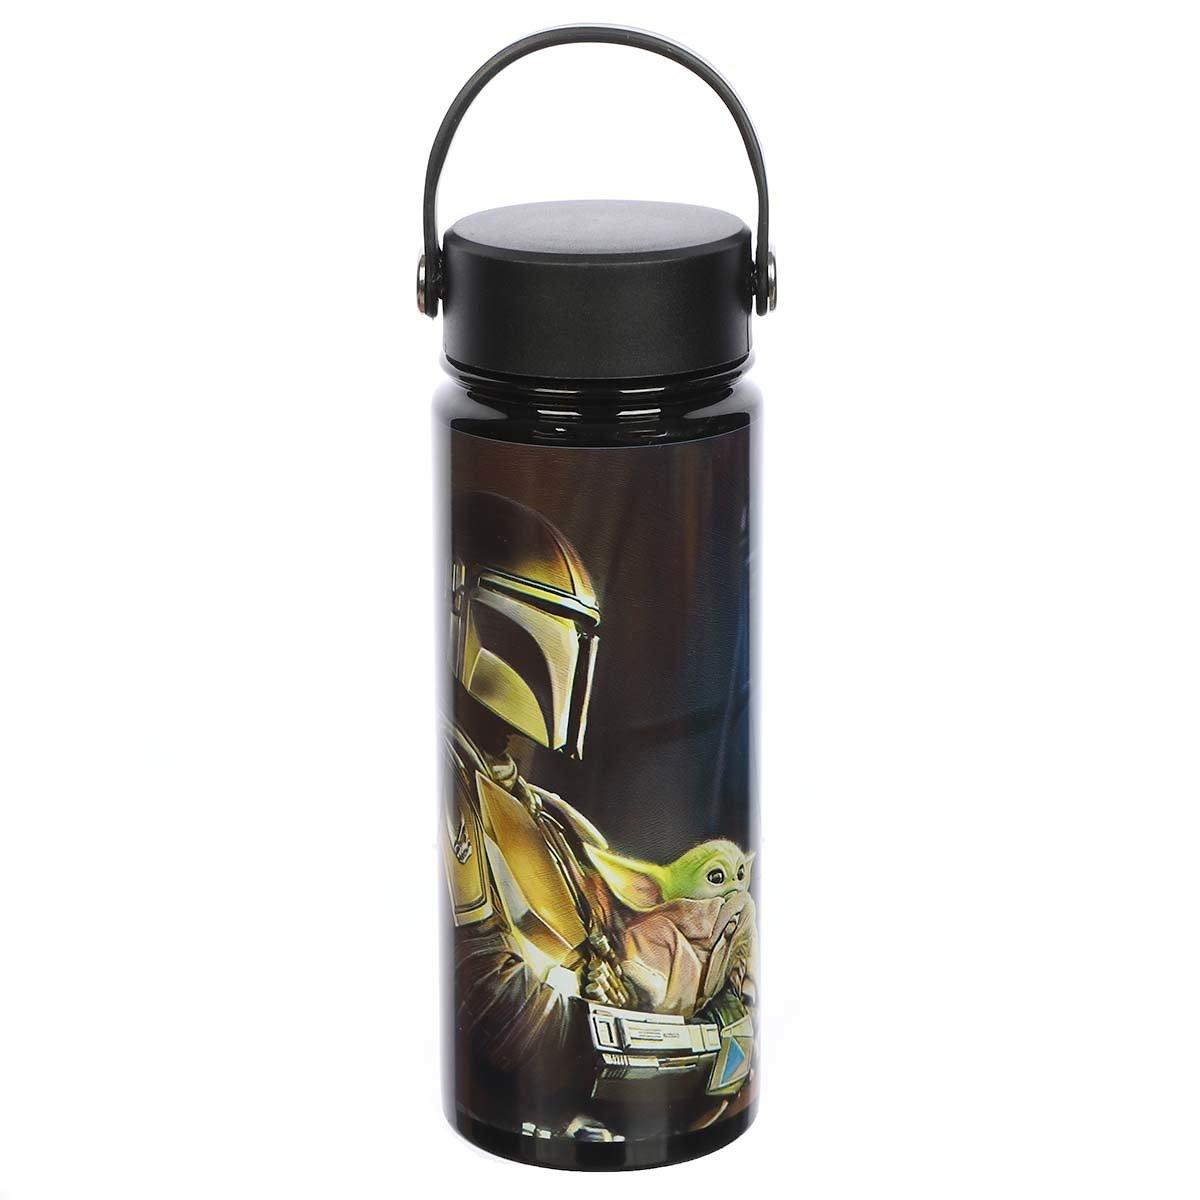 Five Nights at Freddy's 24 oz. Water Bottle